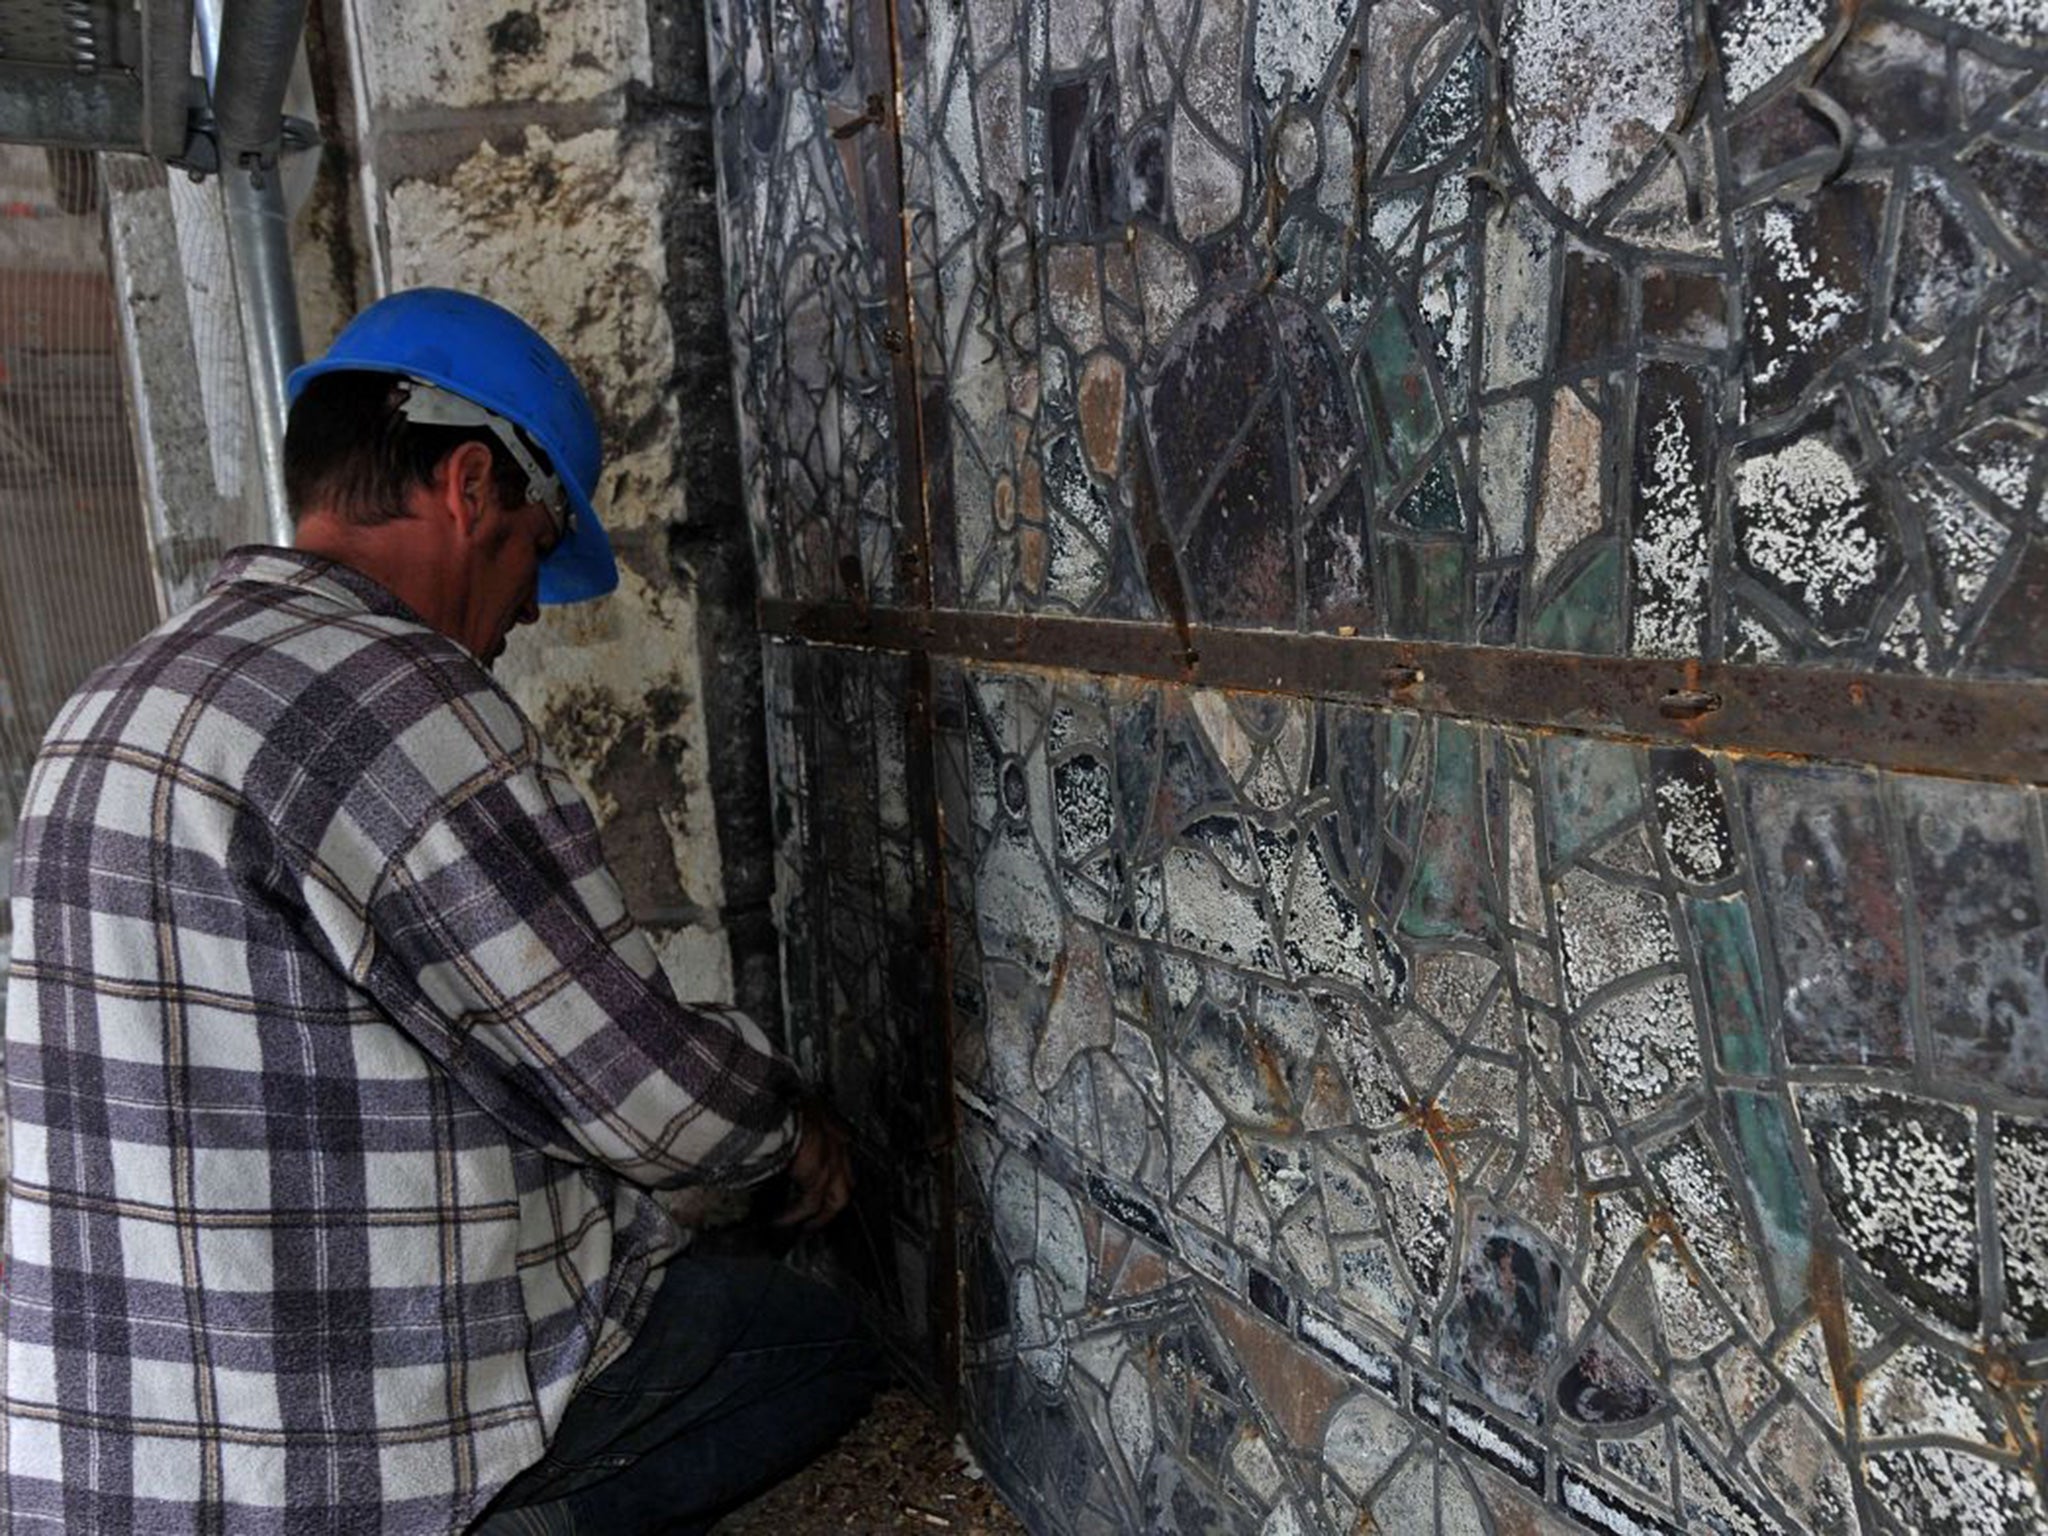 A worker restores stained glass at Chartres Cathedral during renovation work on September 15, 2015